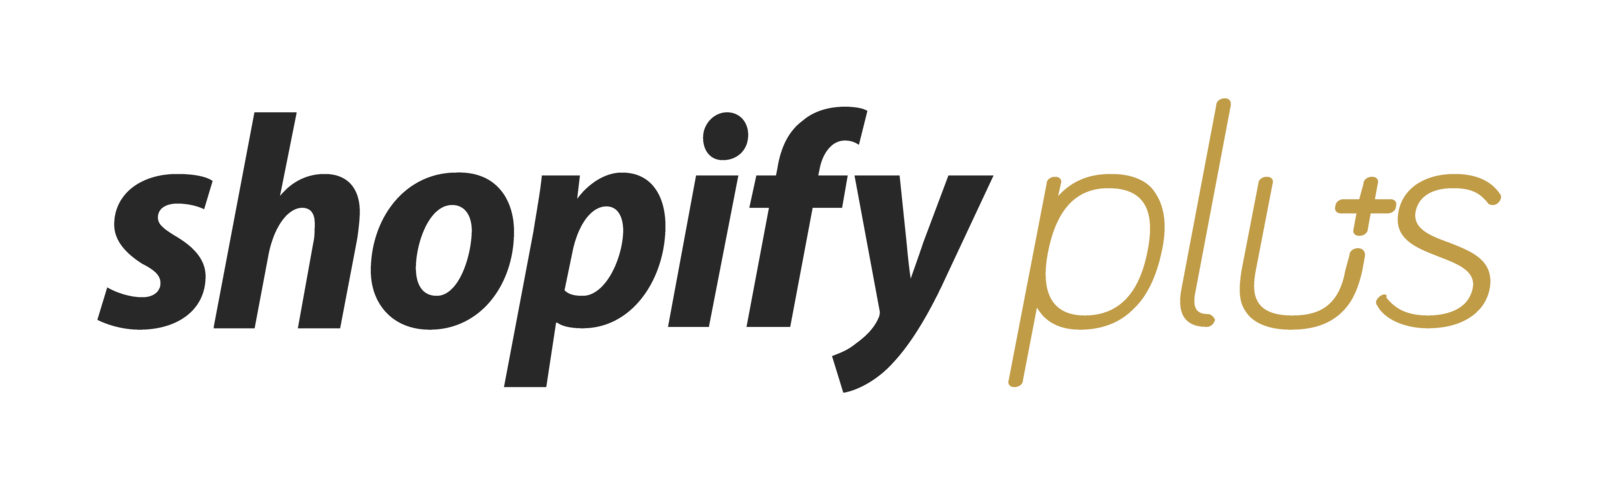 Shopify Plus Logo - Shopify Plus vs. Magento Spoiler: Magento Wins in Only 6 Cases